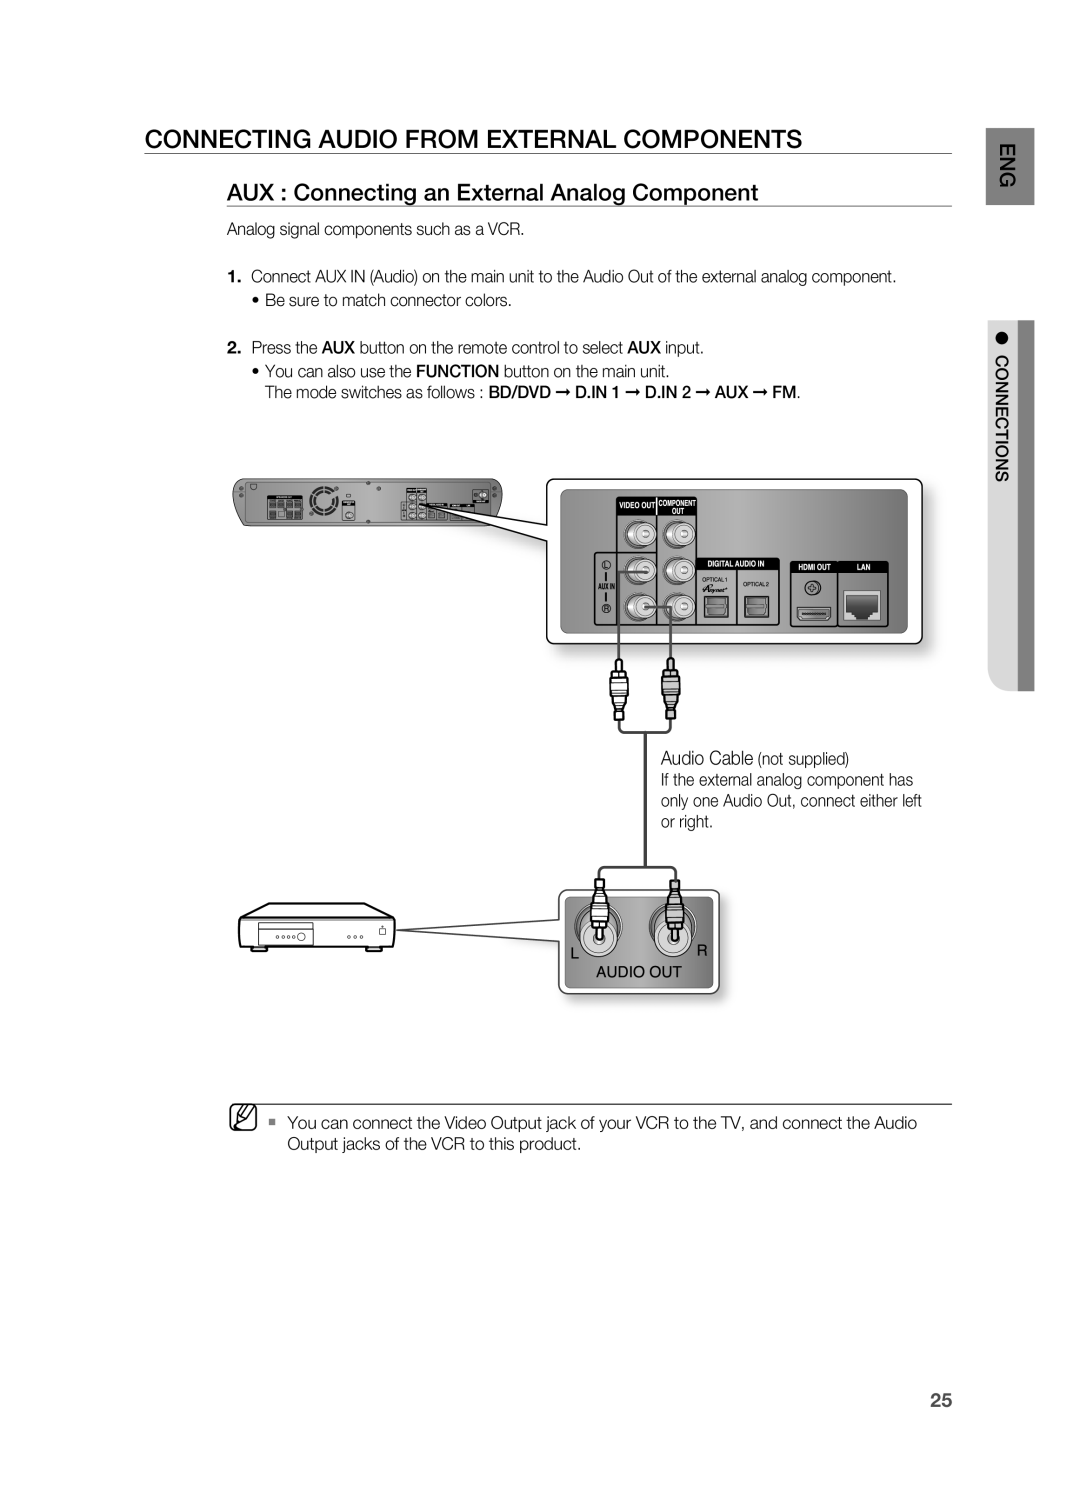 Samsung HT-BD2S manual Connecting Audio from External Components, AUX : Connecting an External Analog Component 